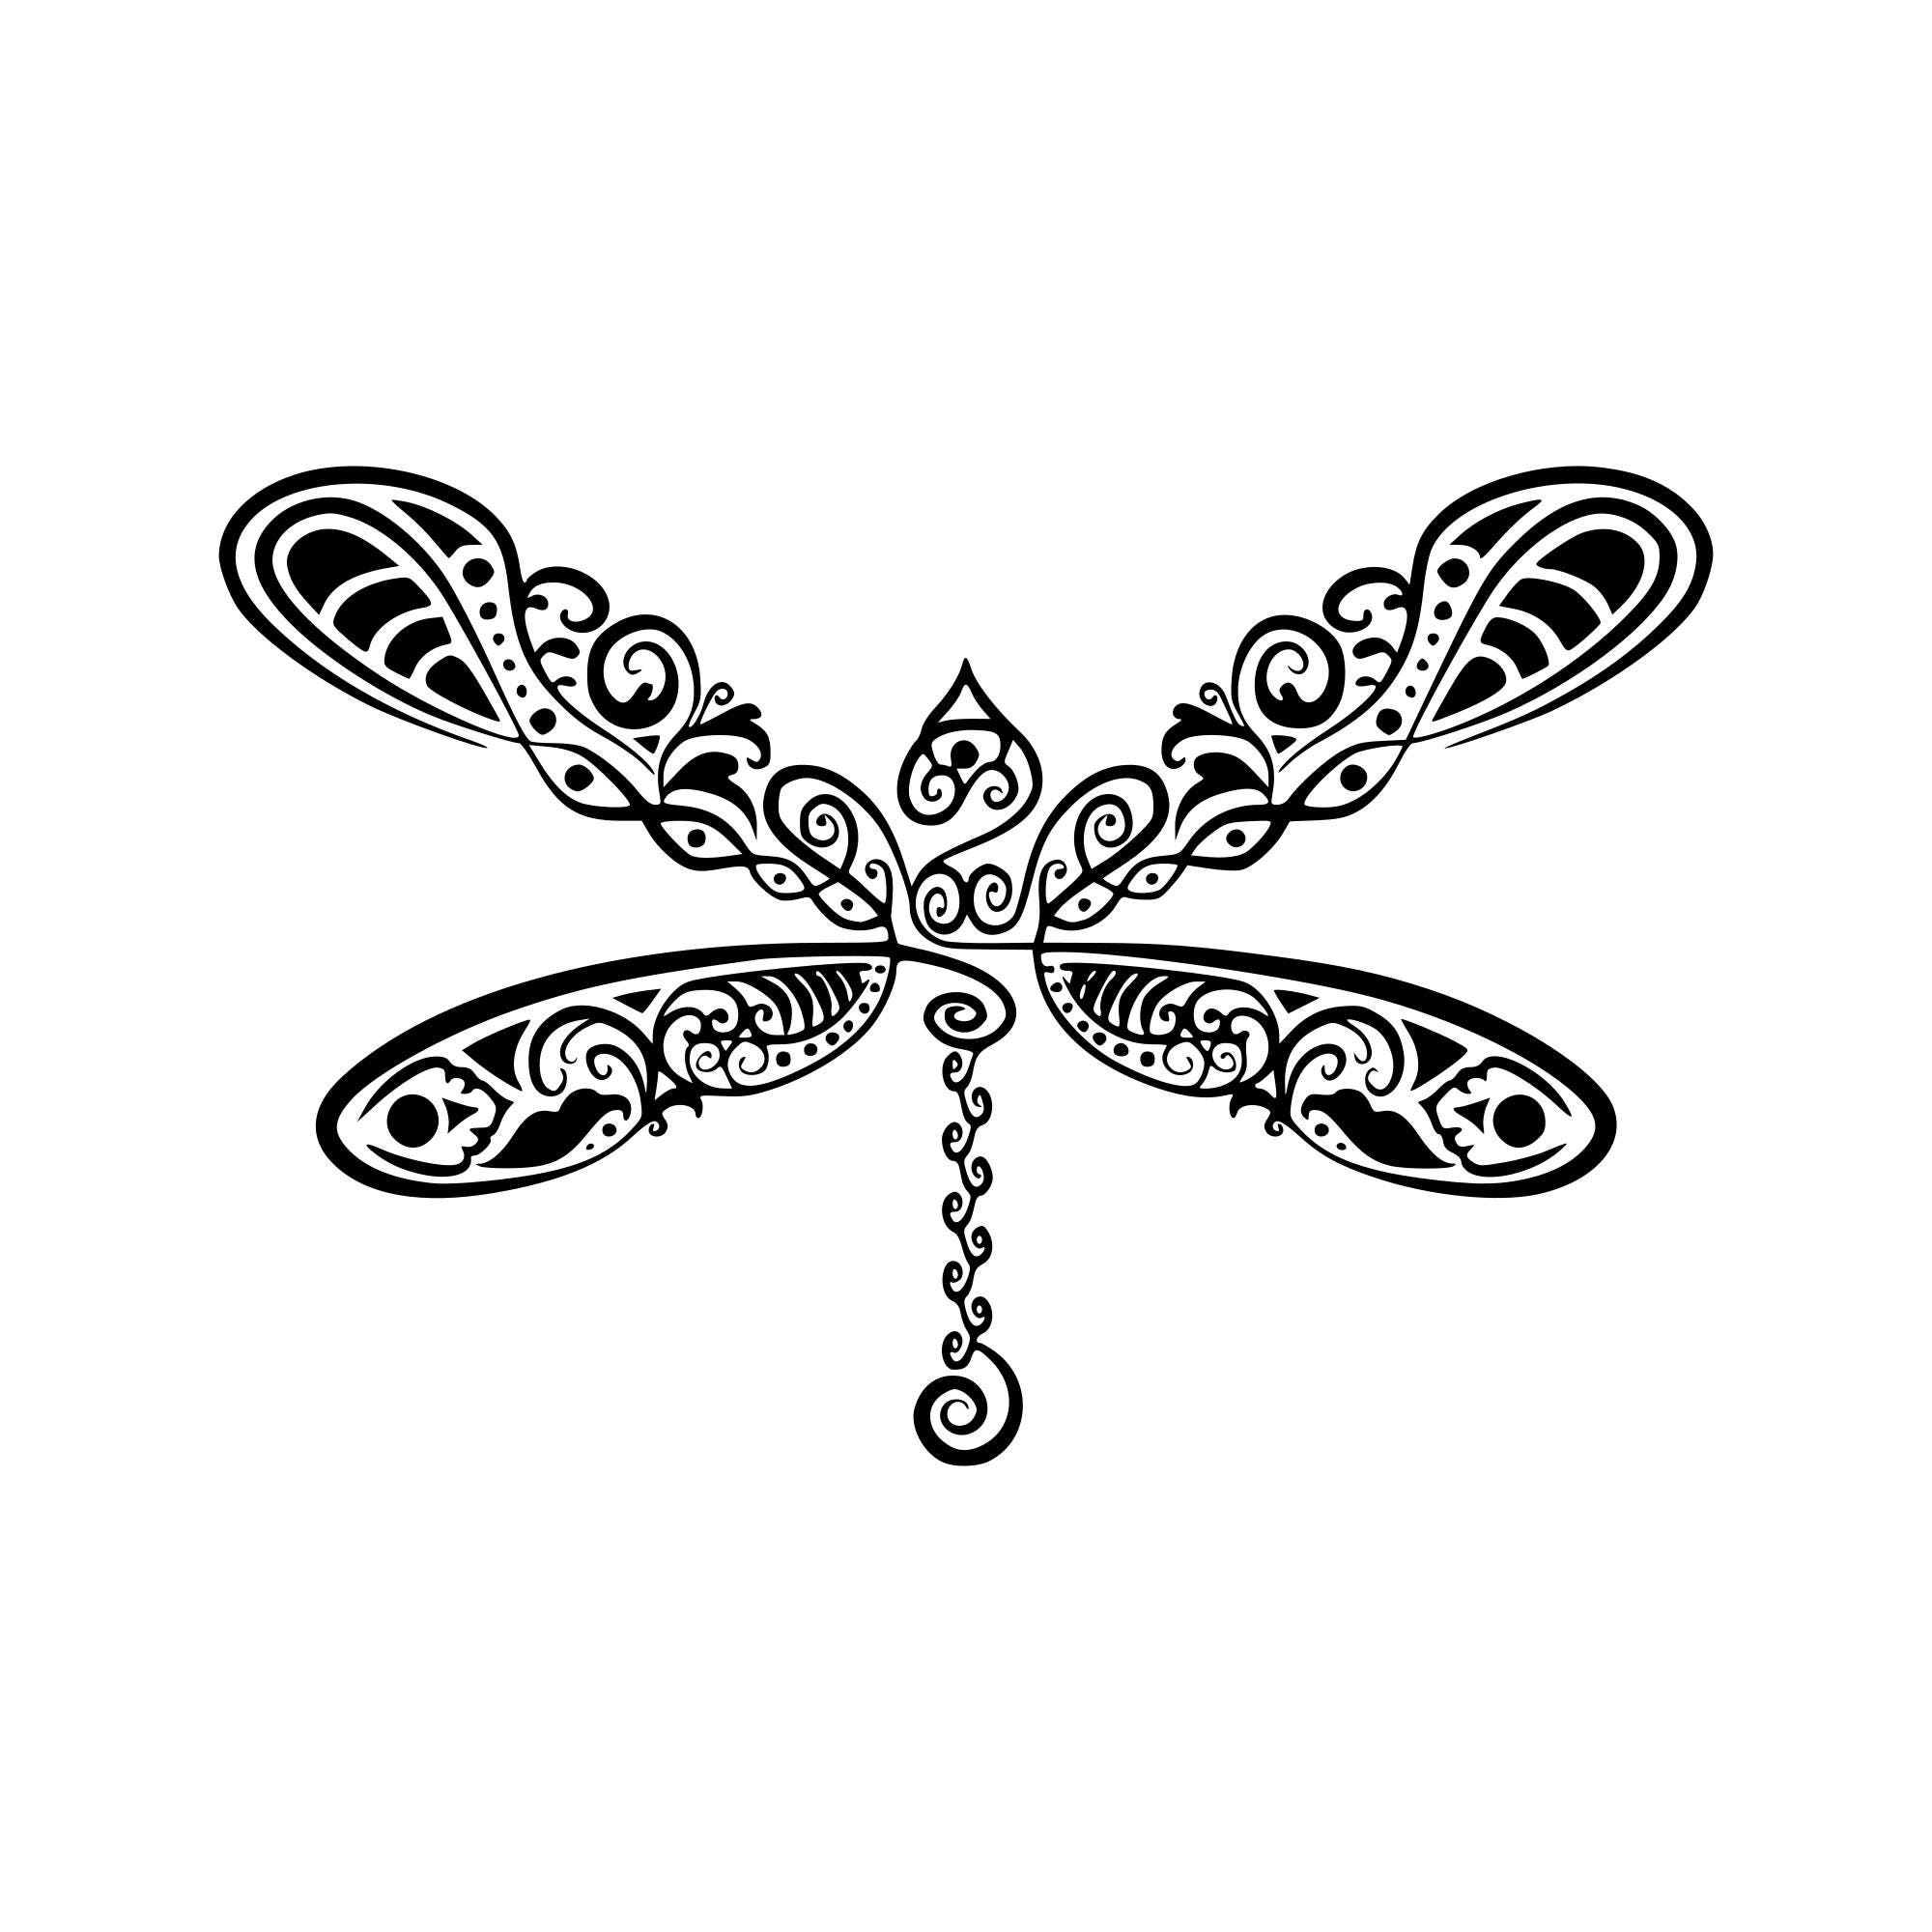 Download Dragonfly Mandala Svg Free For Silhouette - Free SVG Cut File - Se...